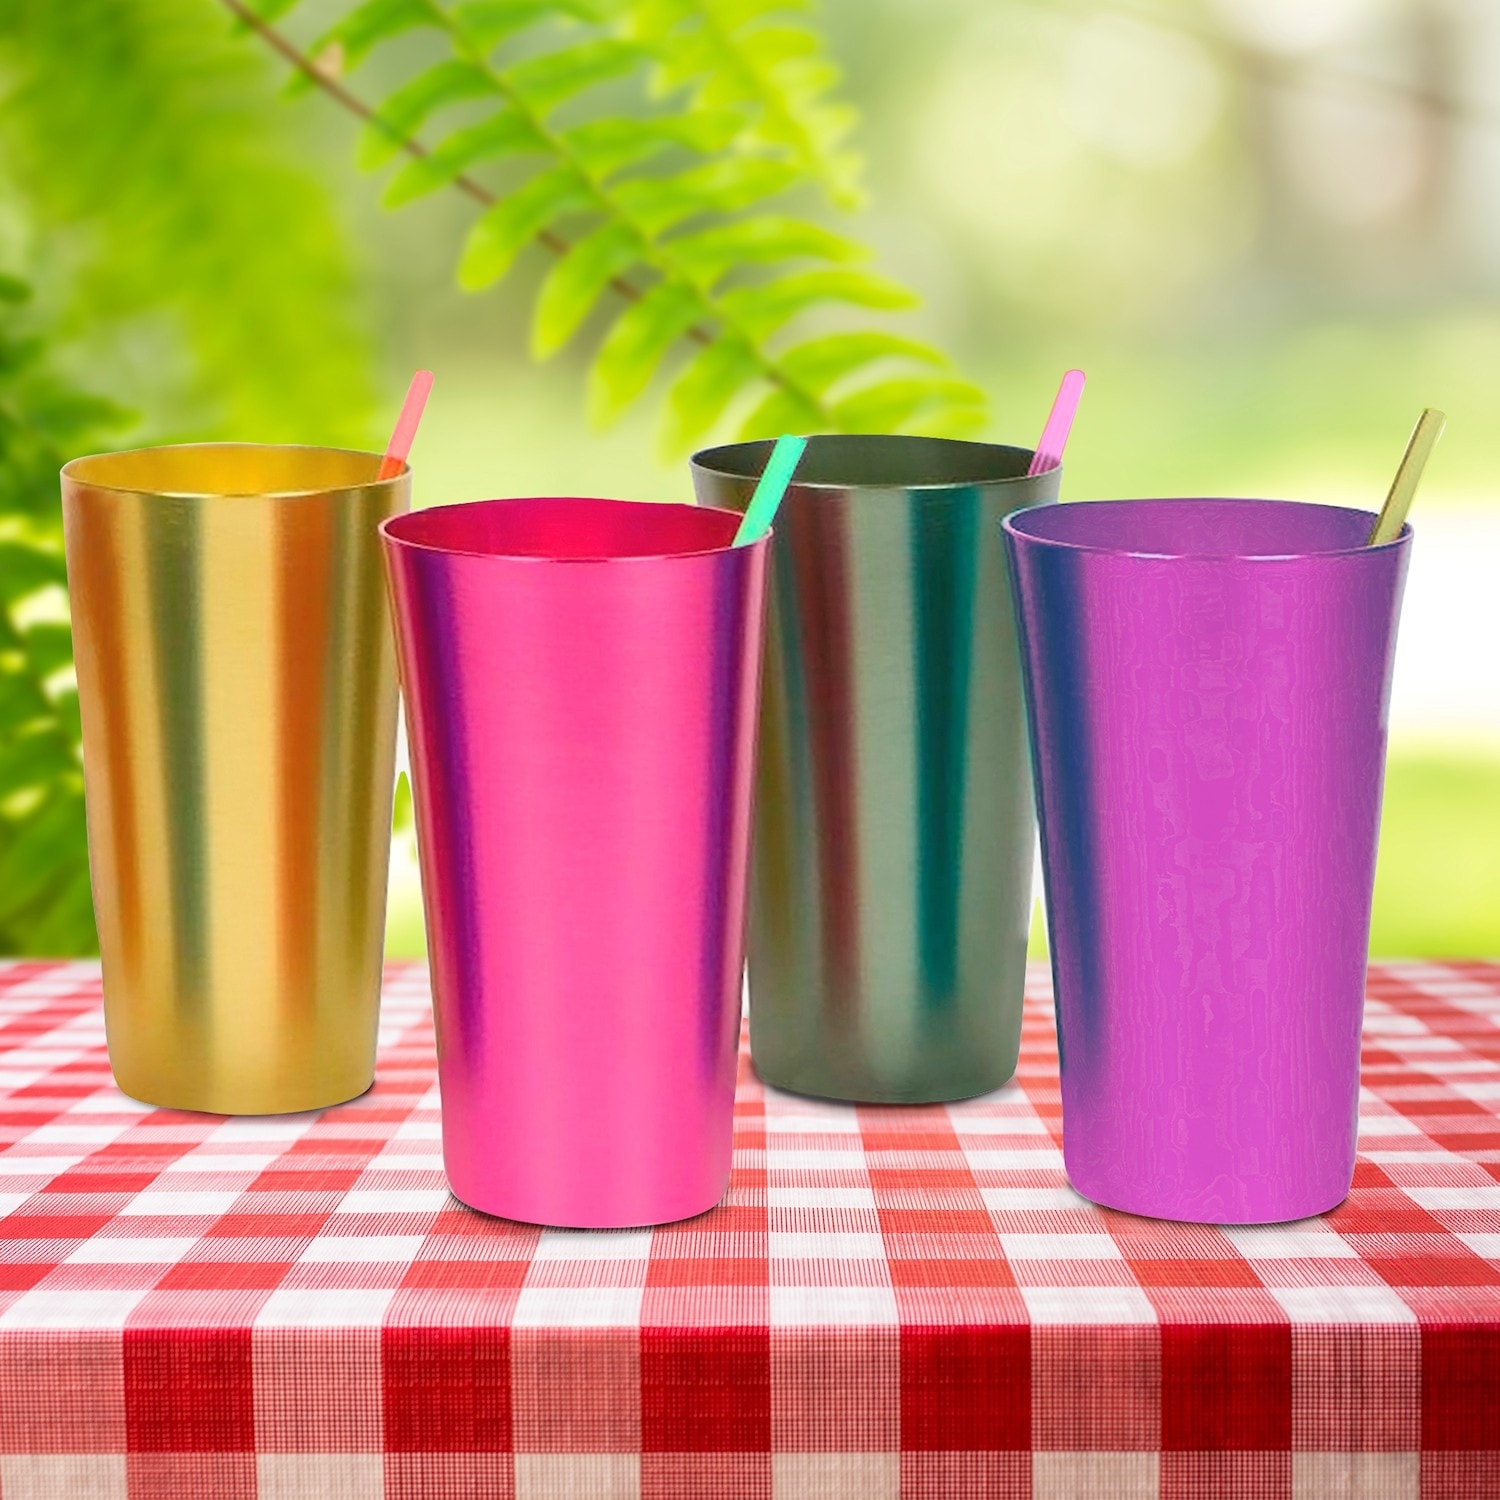 https://ak1.ostkcdn.com/images/products/is/images/direct/a515f2cfbe3423f01e9b76d8ebf5acd344f20ef4/Aluminum-Tumblers---16-Ounce---Set-of-4-Different-Vintage-Style-Colored-Metal-Cups.jpg